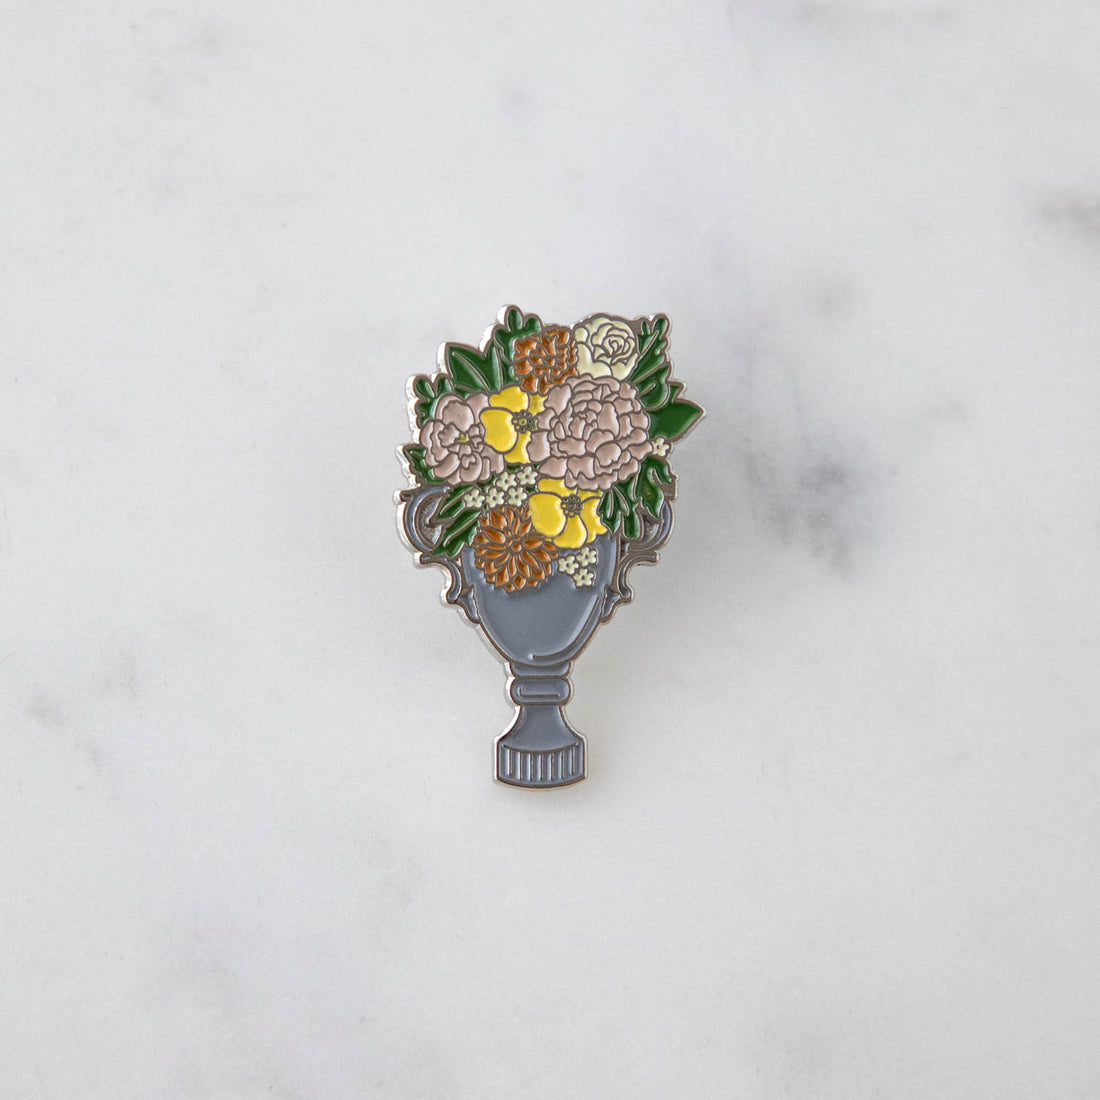 An Hester &amp; Cook enamel pin depicting a garden trophy with flowers in a vase, perfect for decorating a backpack.